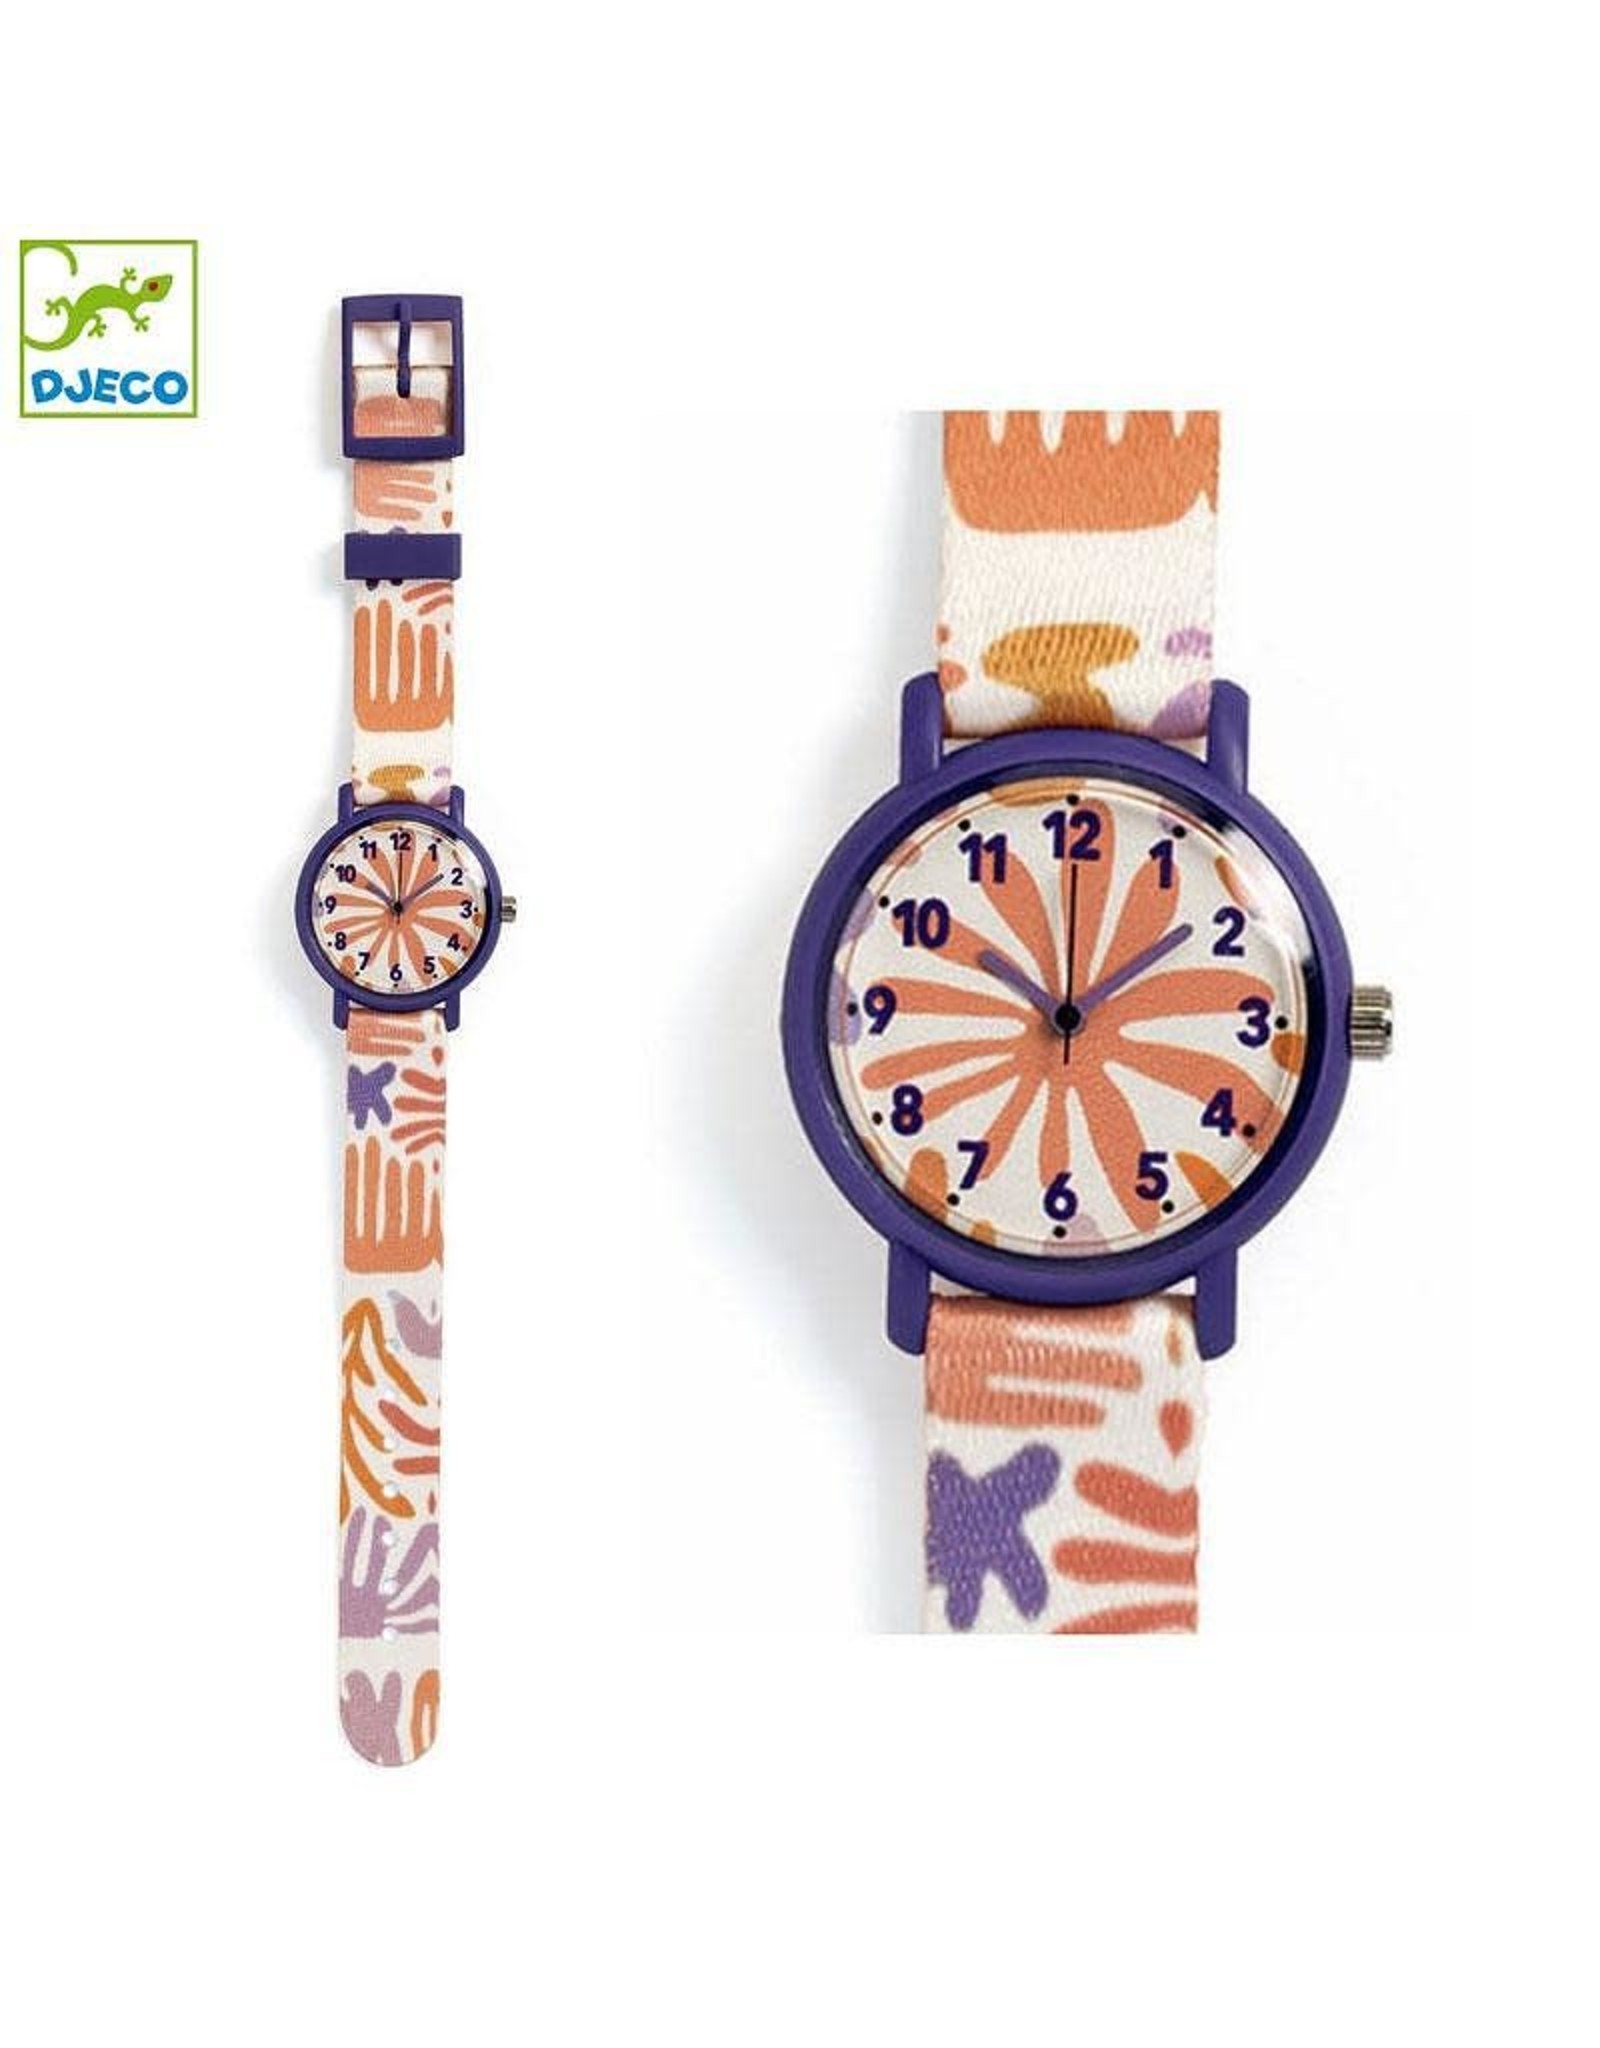 Djeco Leaves Watch